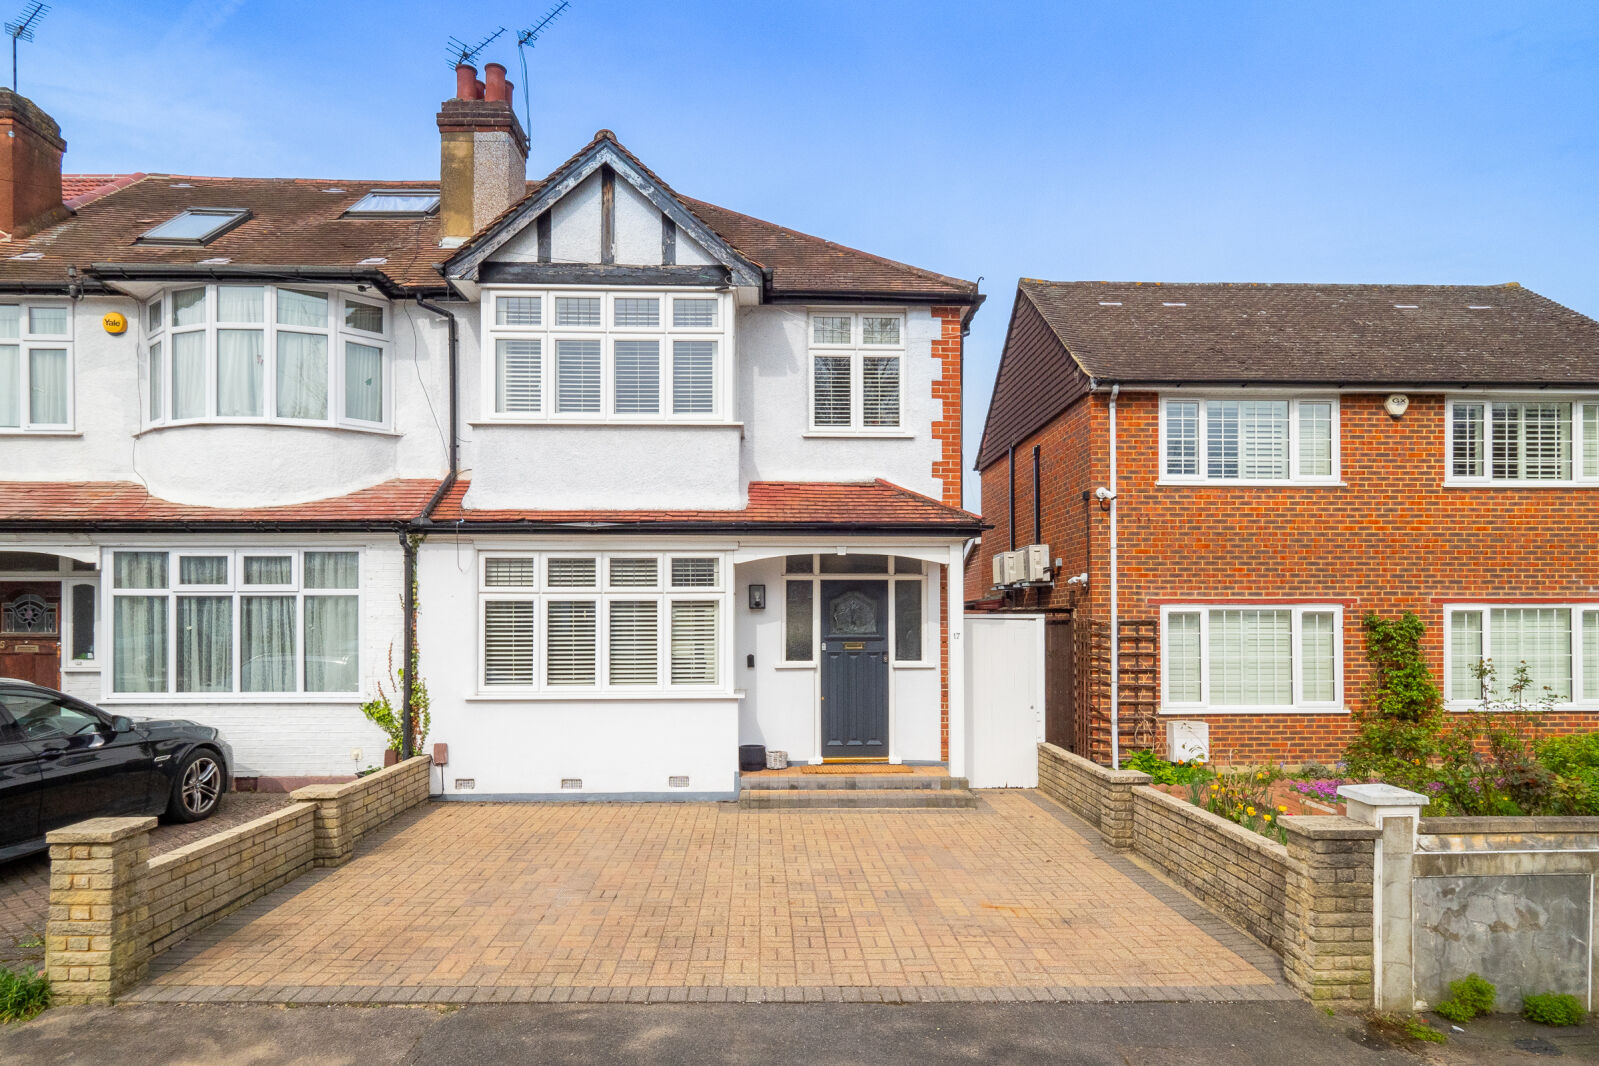 3 bedroom end terraced house for sale St. Johns Road, Sutton, SM1, main image